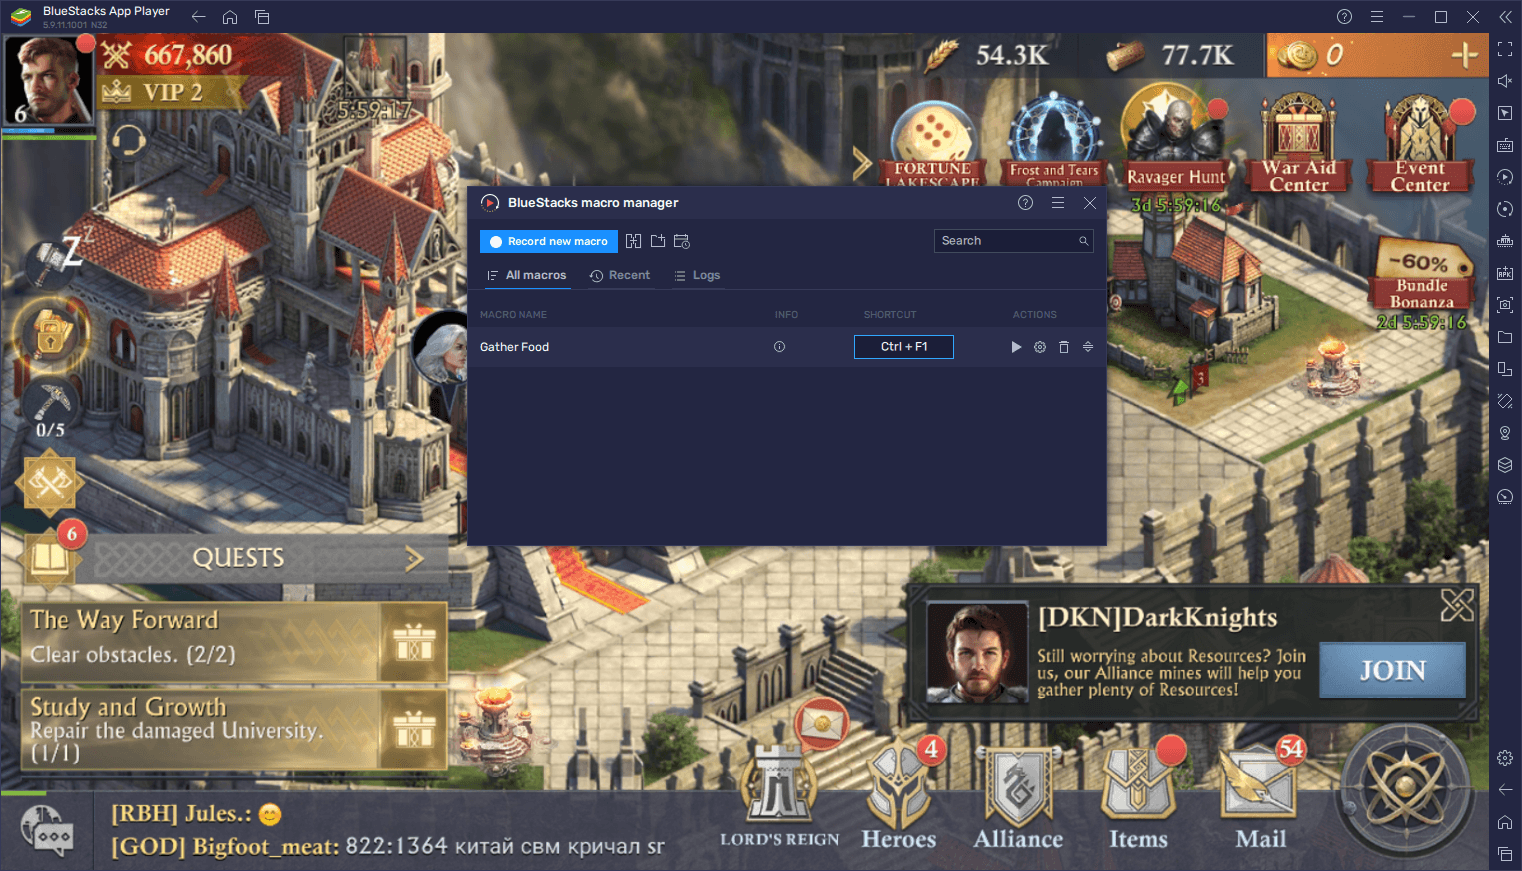 King of Avalon on PC - How to Use Our BlueStacks Tools to Build the Strongest Empire with Ease